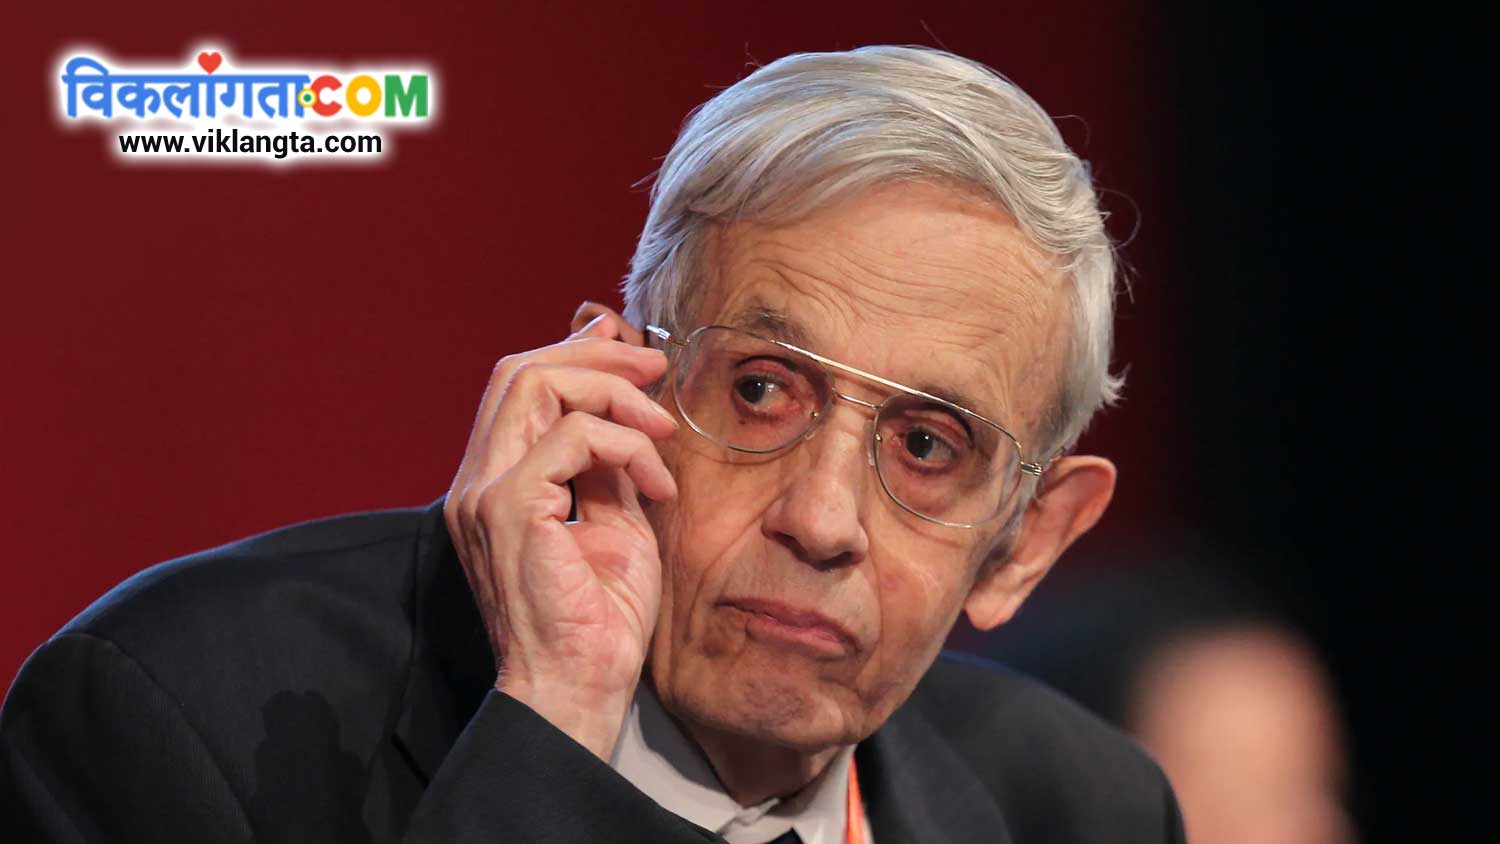 famous disabled person in the world John Nash